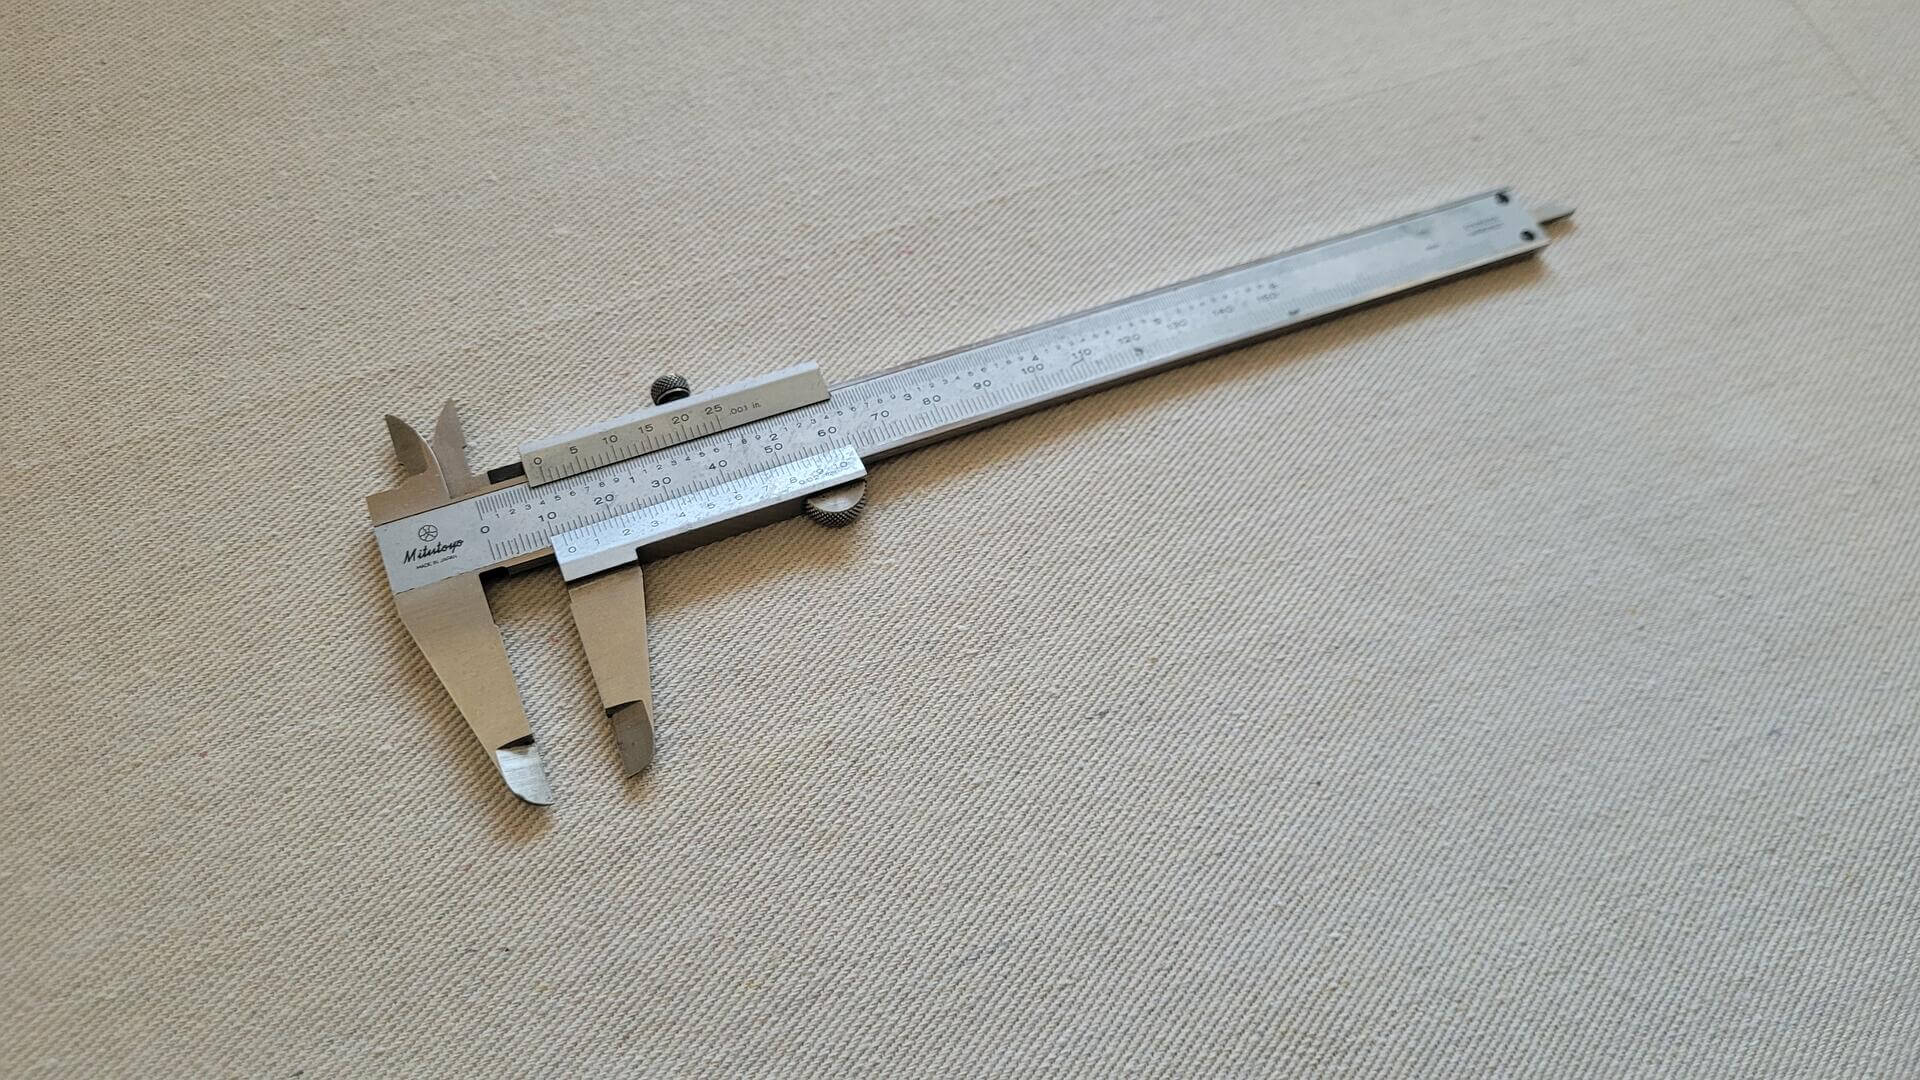 mitutoyo-precision-vernier-caliper-150mm-vintage-made-in-japan-collectible-machinist-engineering-marking-and-measuring-tools